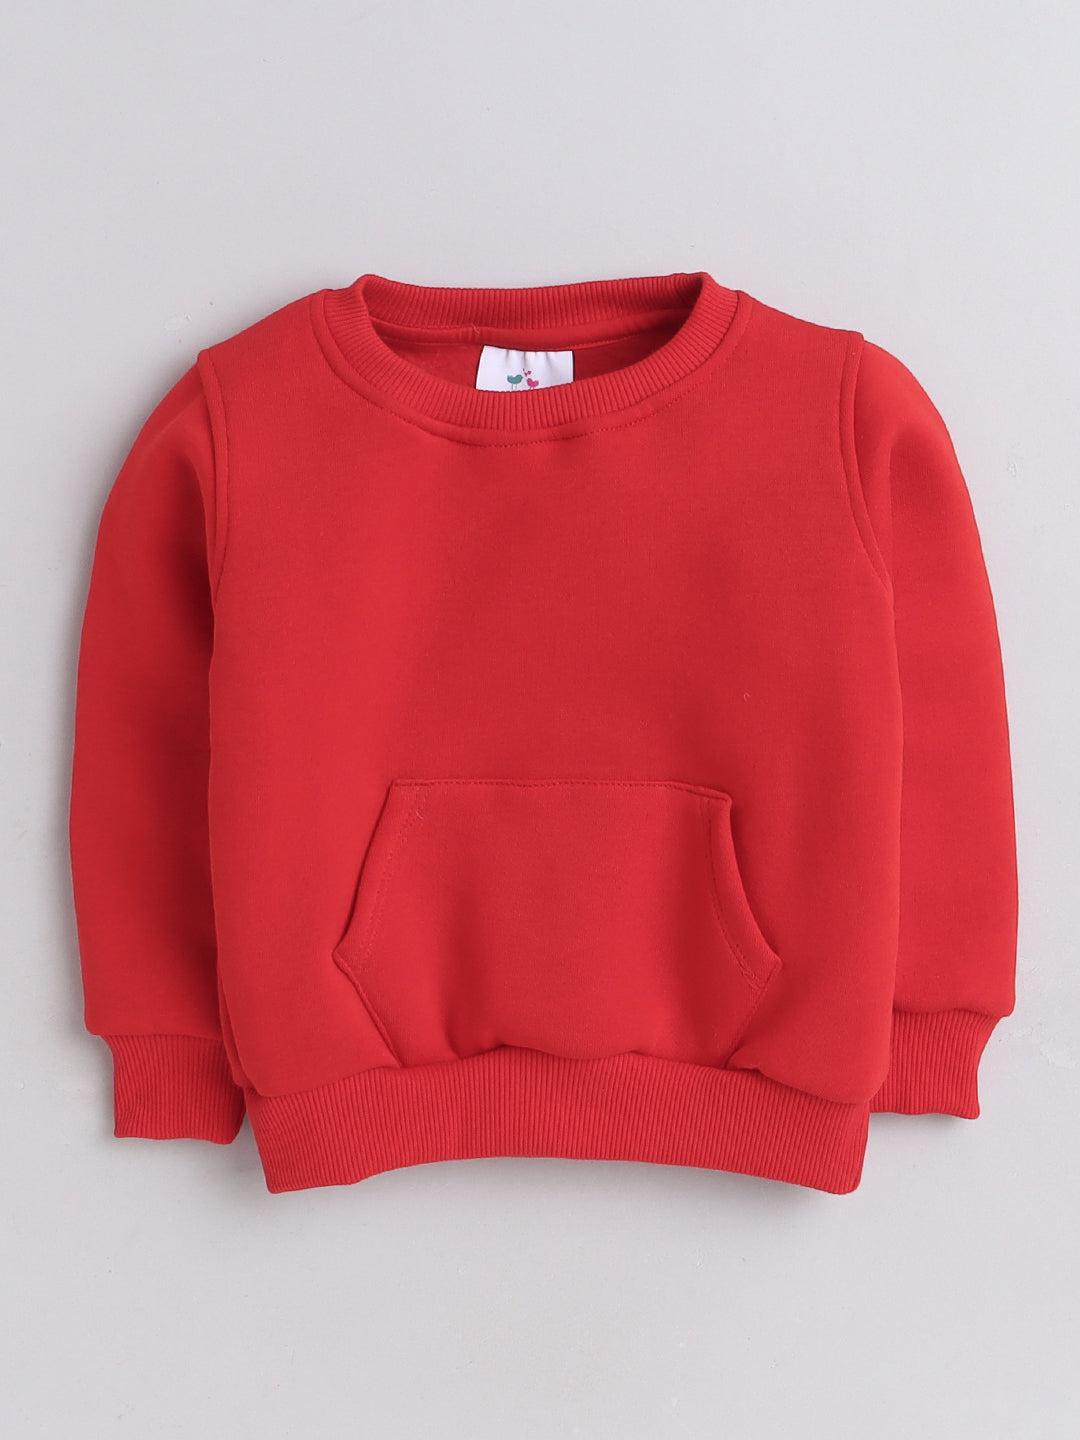 Knitting Doodles Kid's Sweatshirt with Warm Fleece and Pocket in front- Red